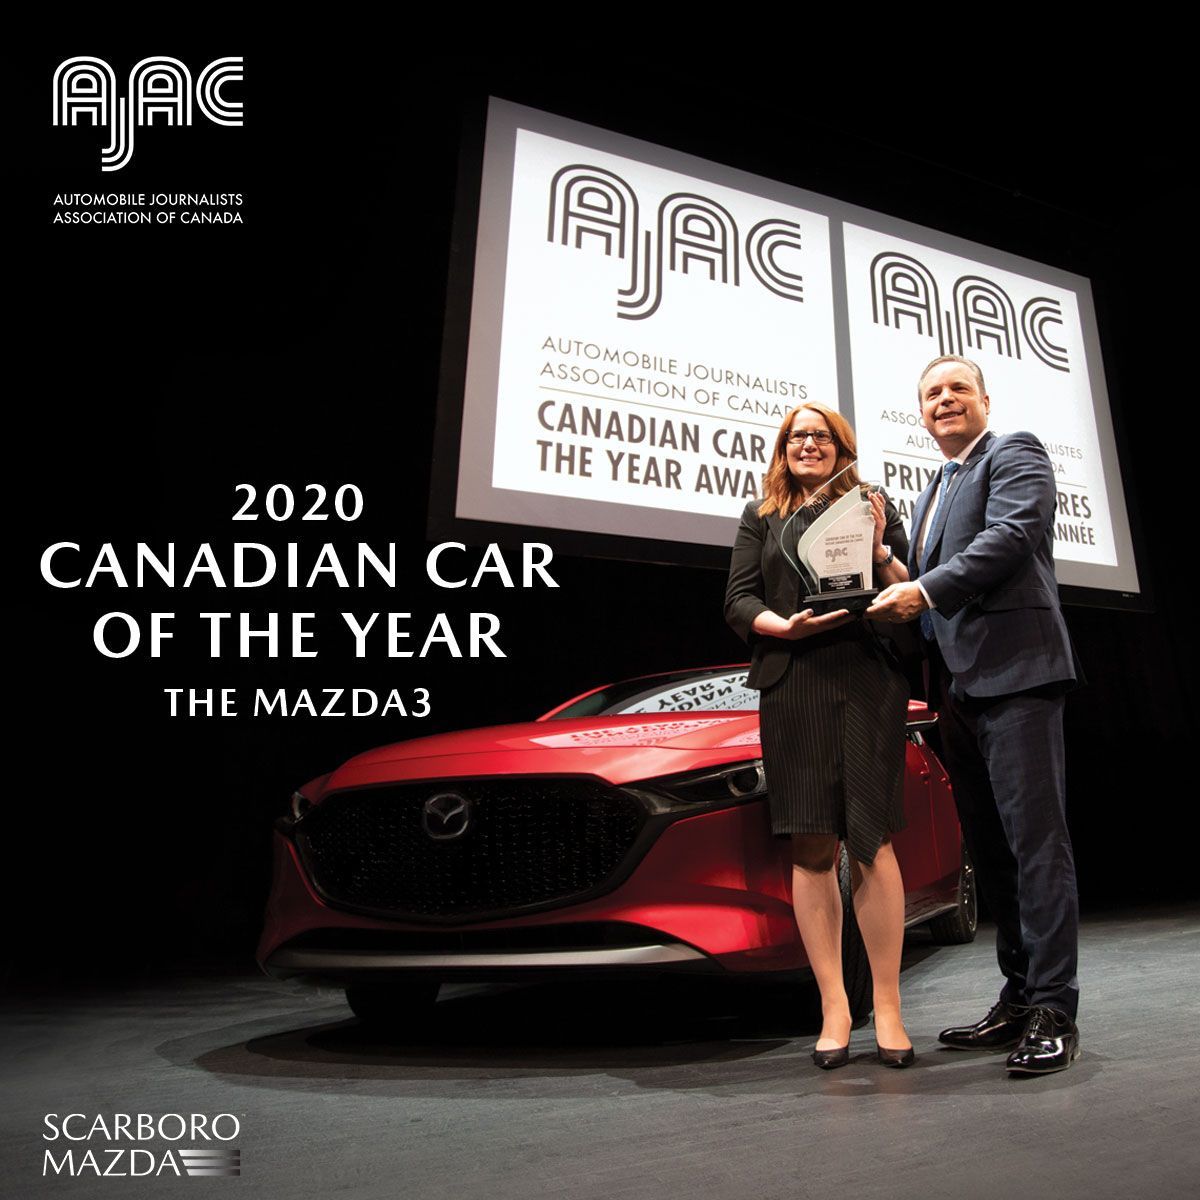 The Mazda3 wins AJAC's 2020 Canadian Car of the Year!